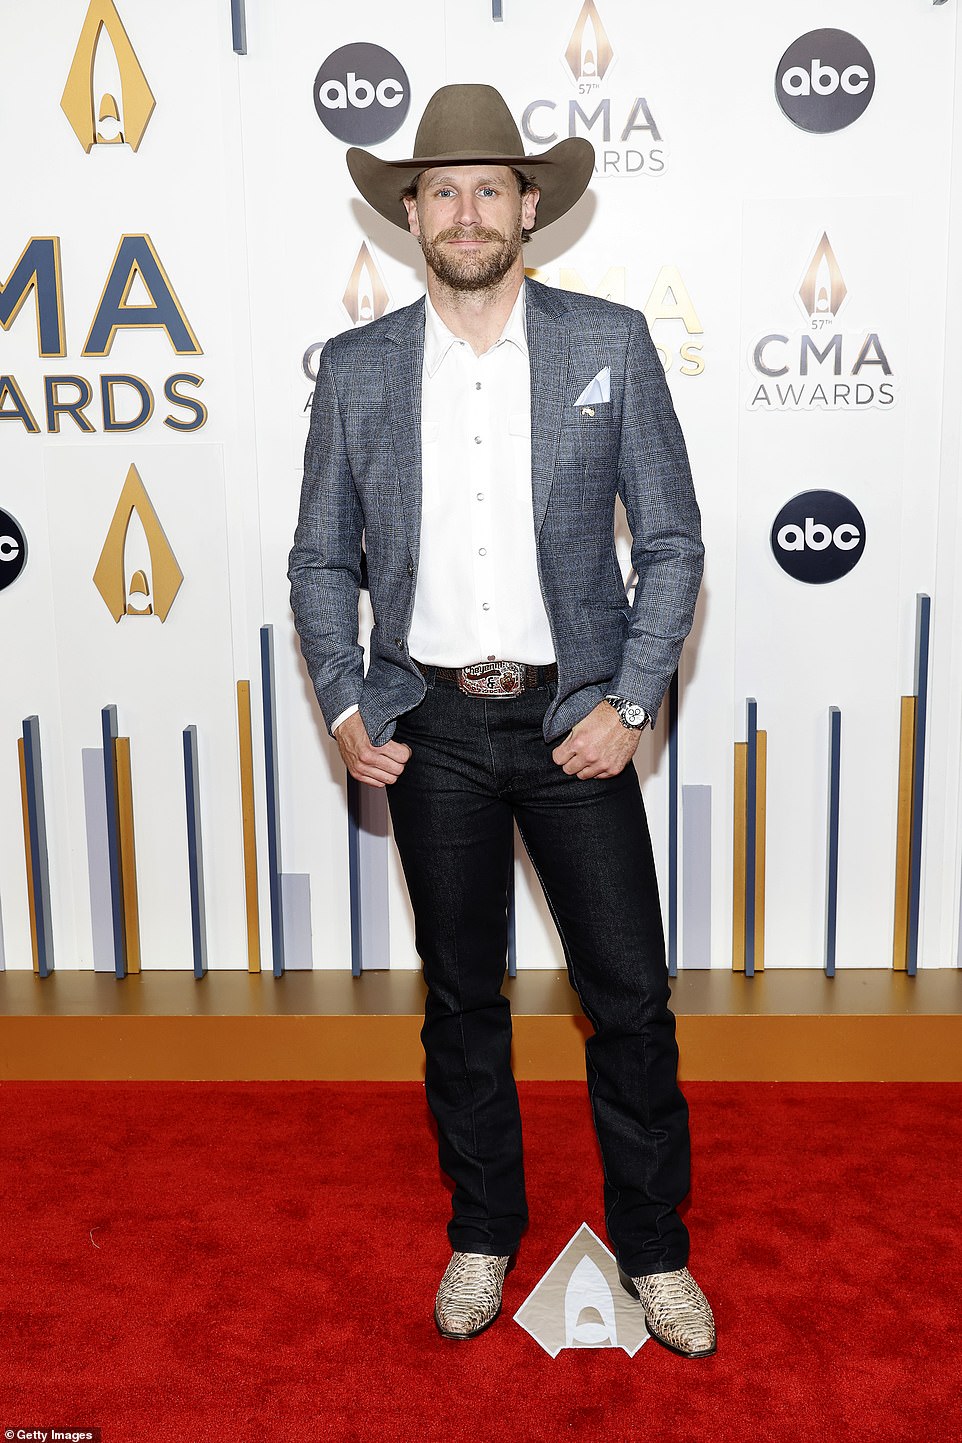 Fully dressed: Chase Rice exuded confidence as he posed for photos in a charcoal gray jacket, dark-wash jeans and alligator boots